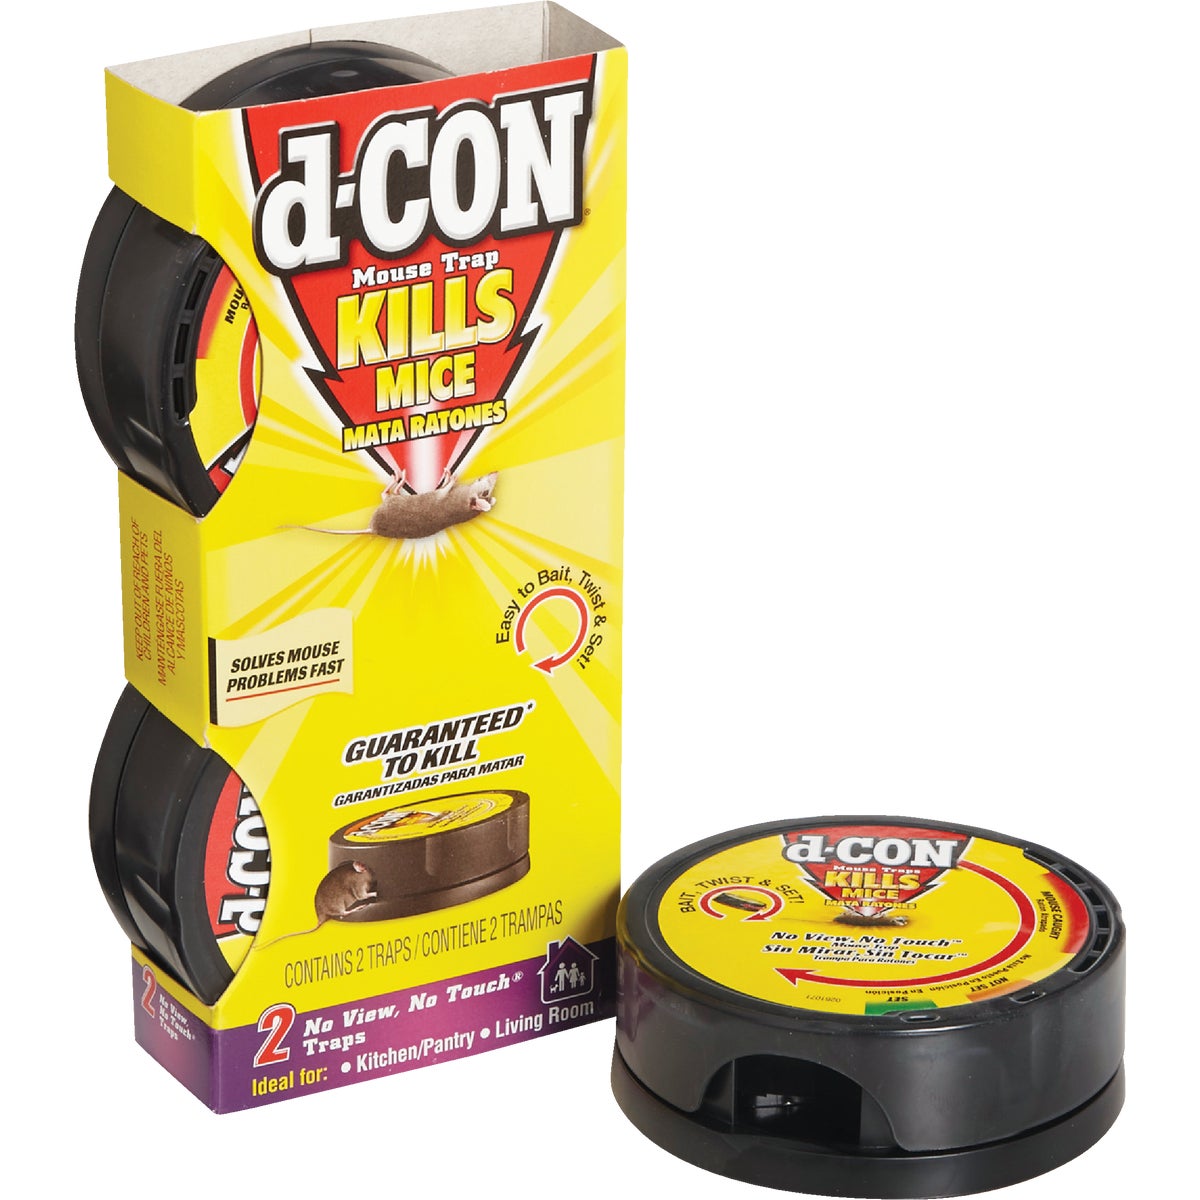 Item 719858, d-CON No View, No Touch mouse trap has an instant kill trap which is sealed